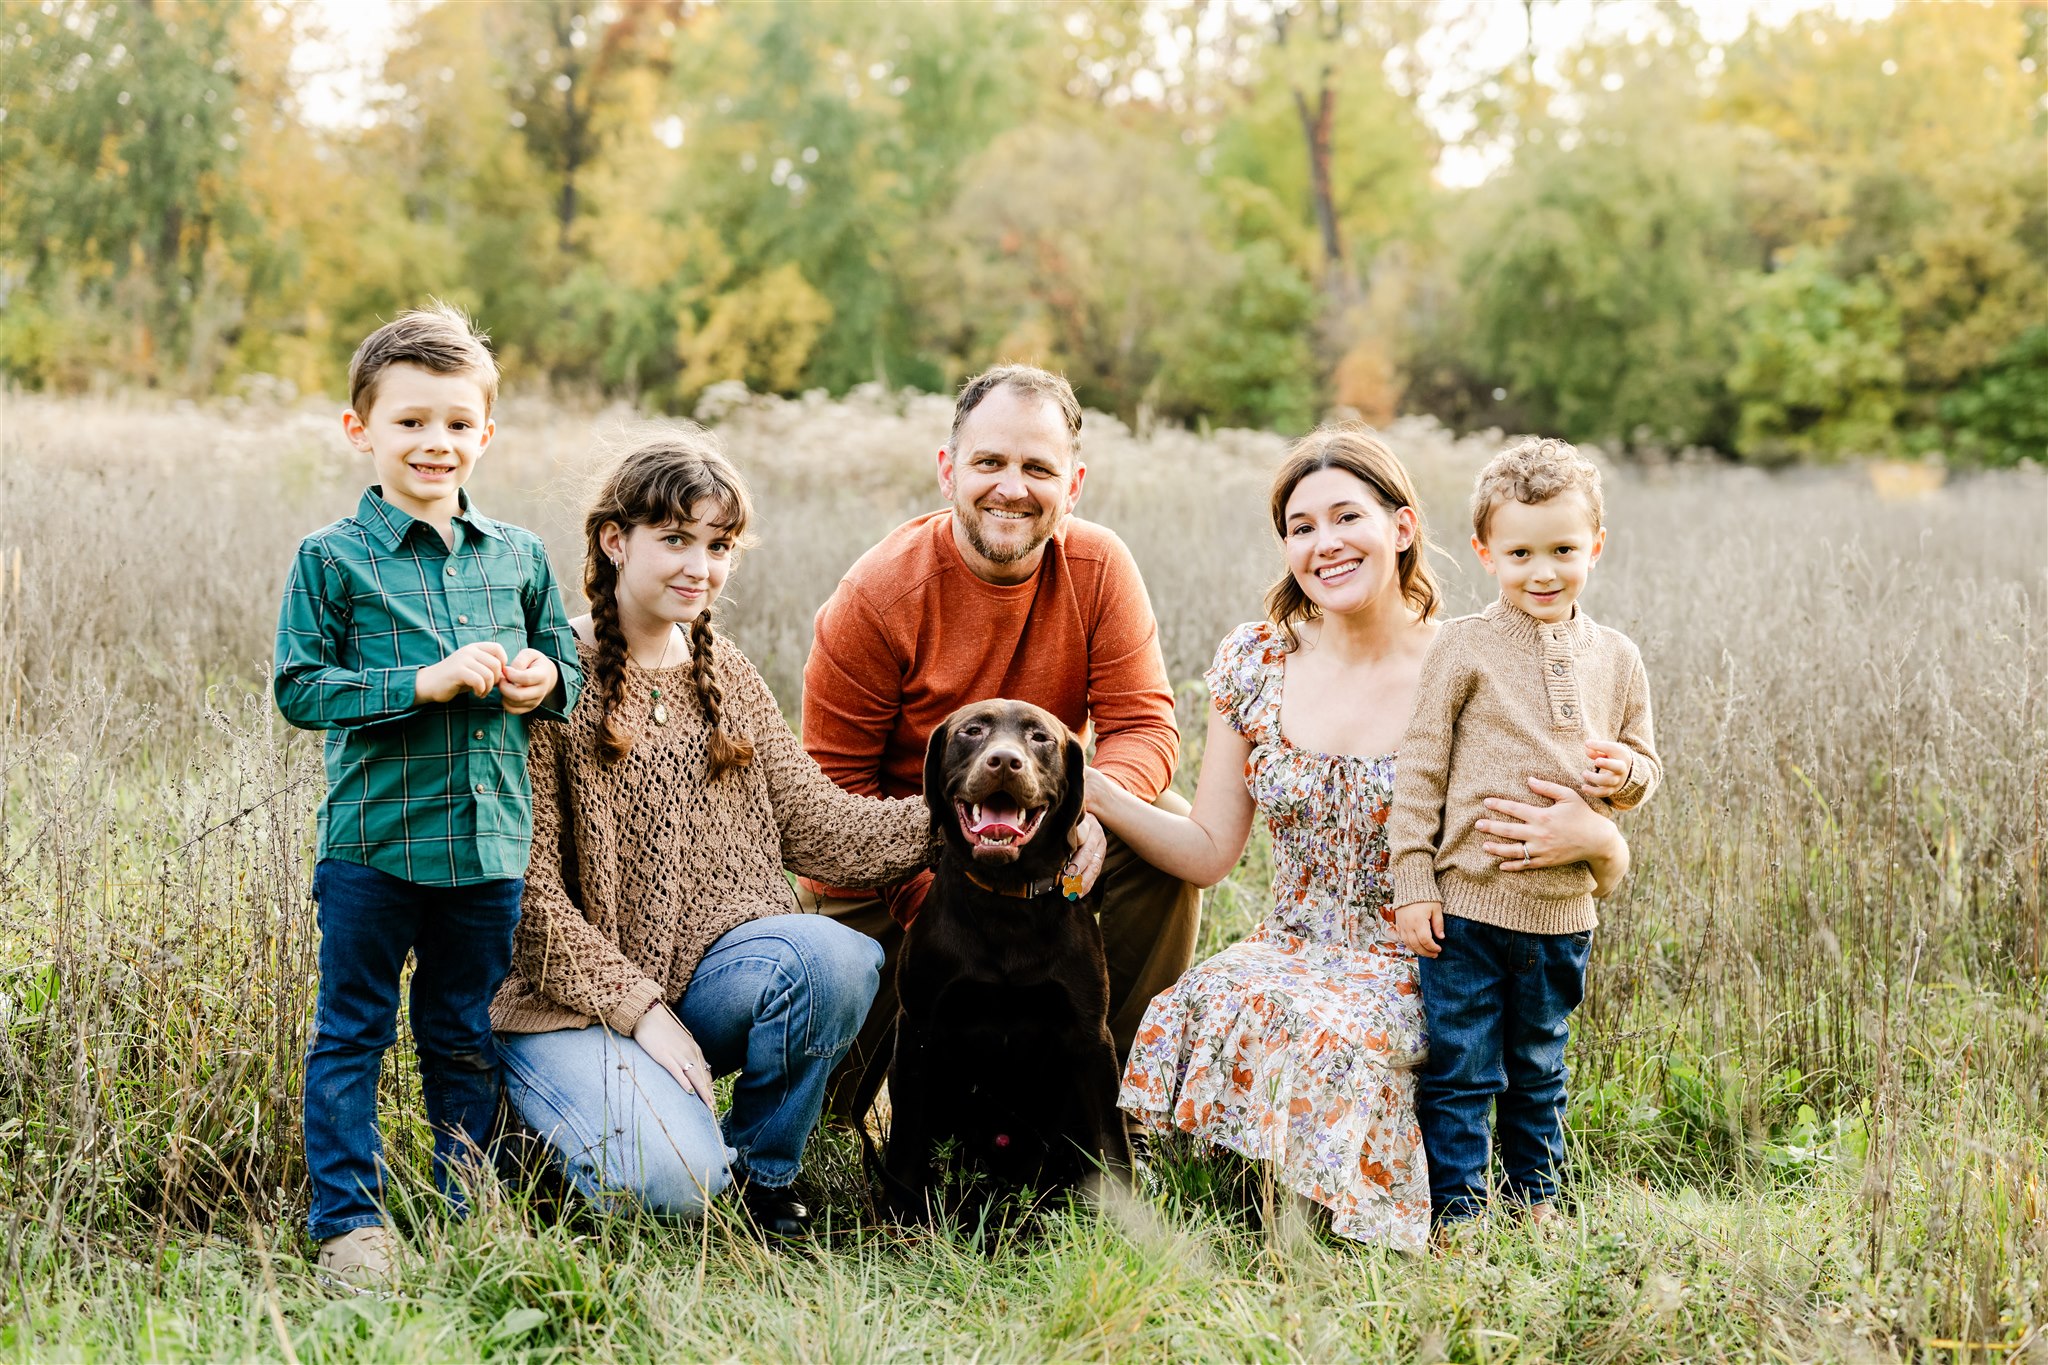 A mom and dad kneel in a field of tall grass with their three children and chocolate lab